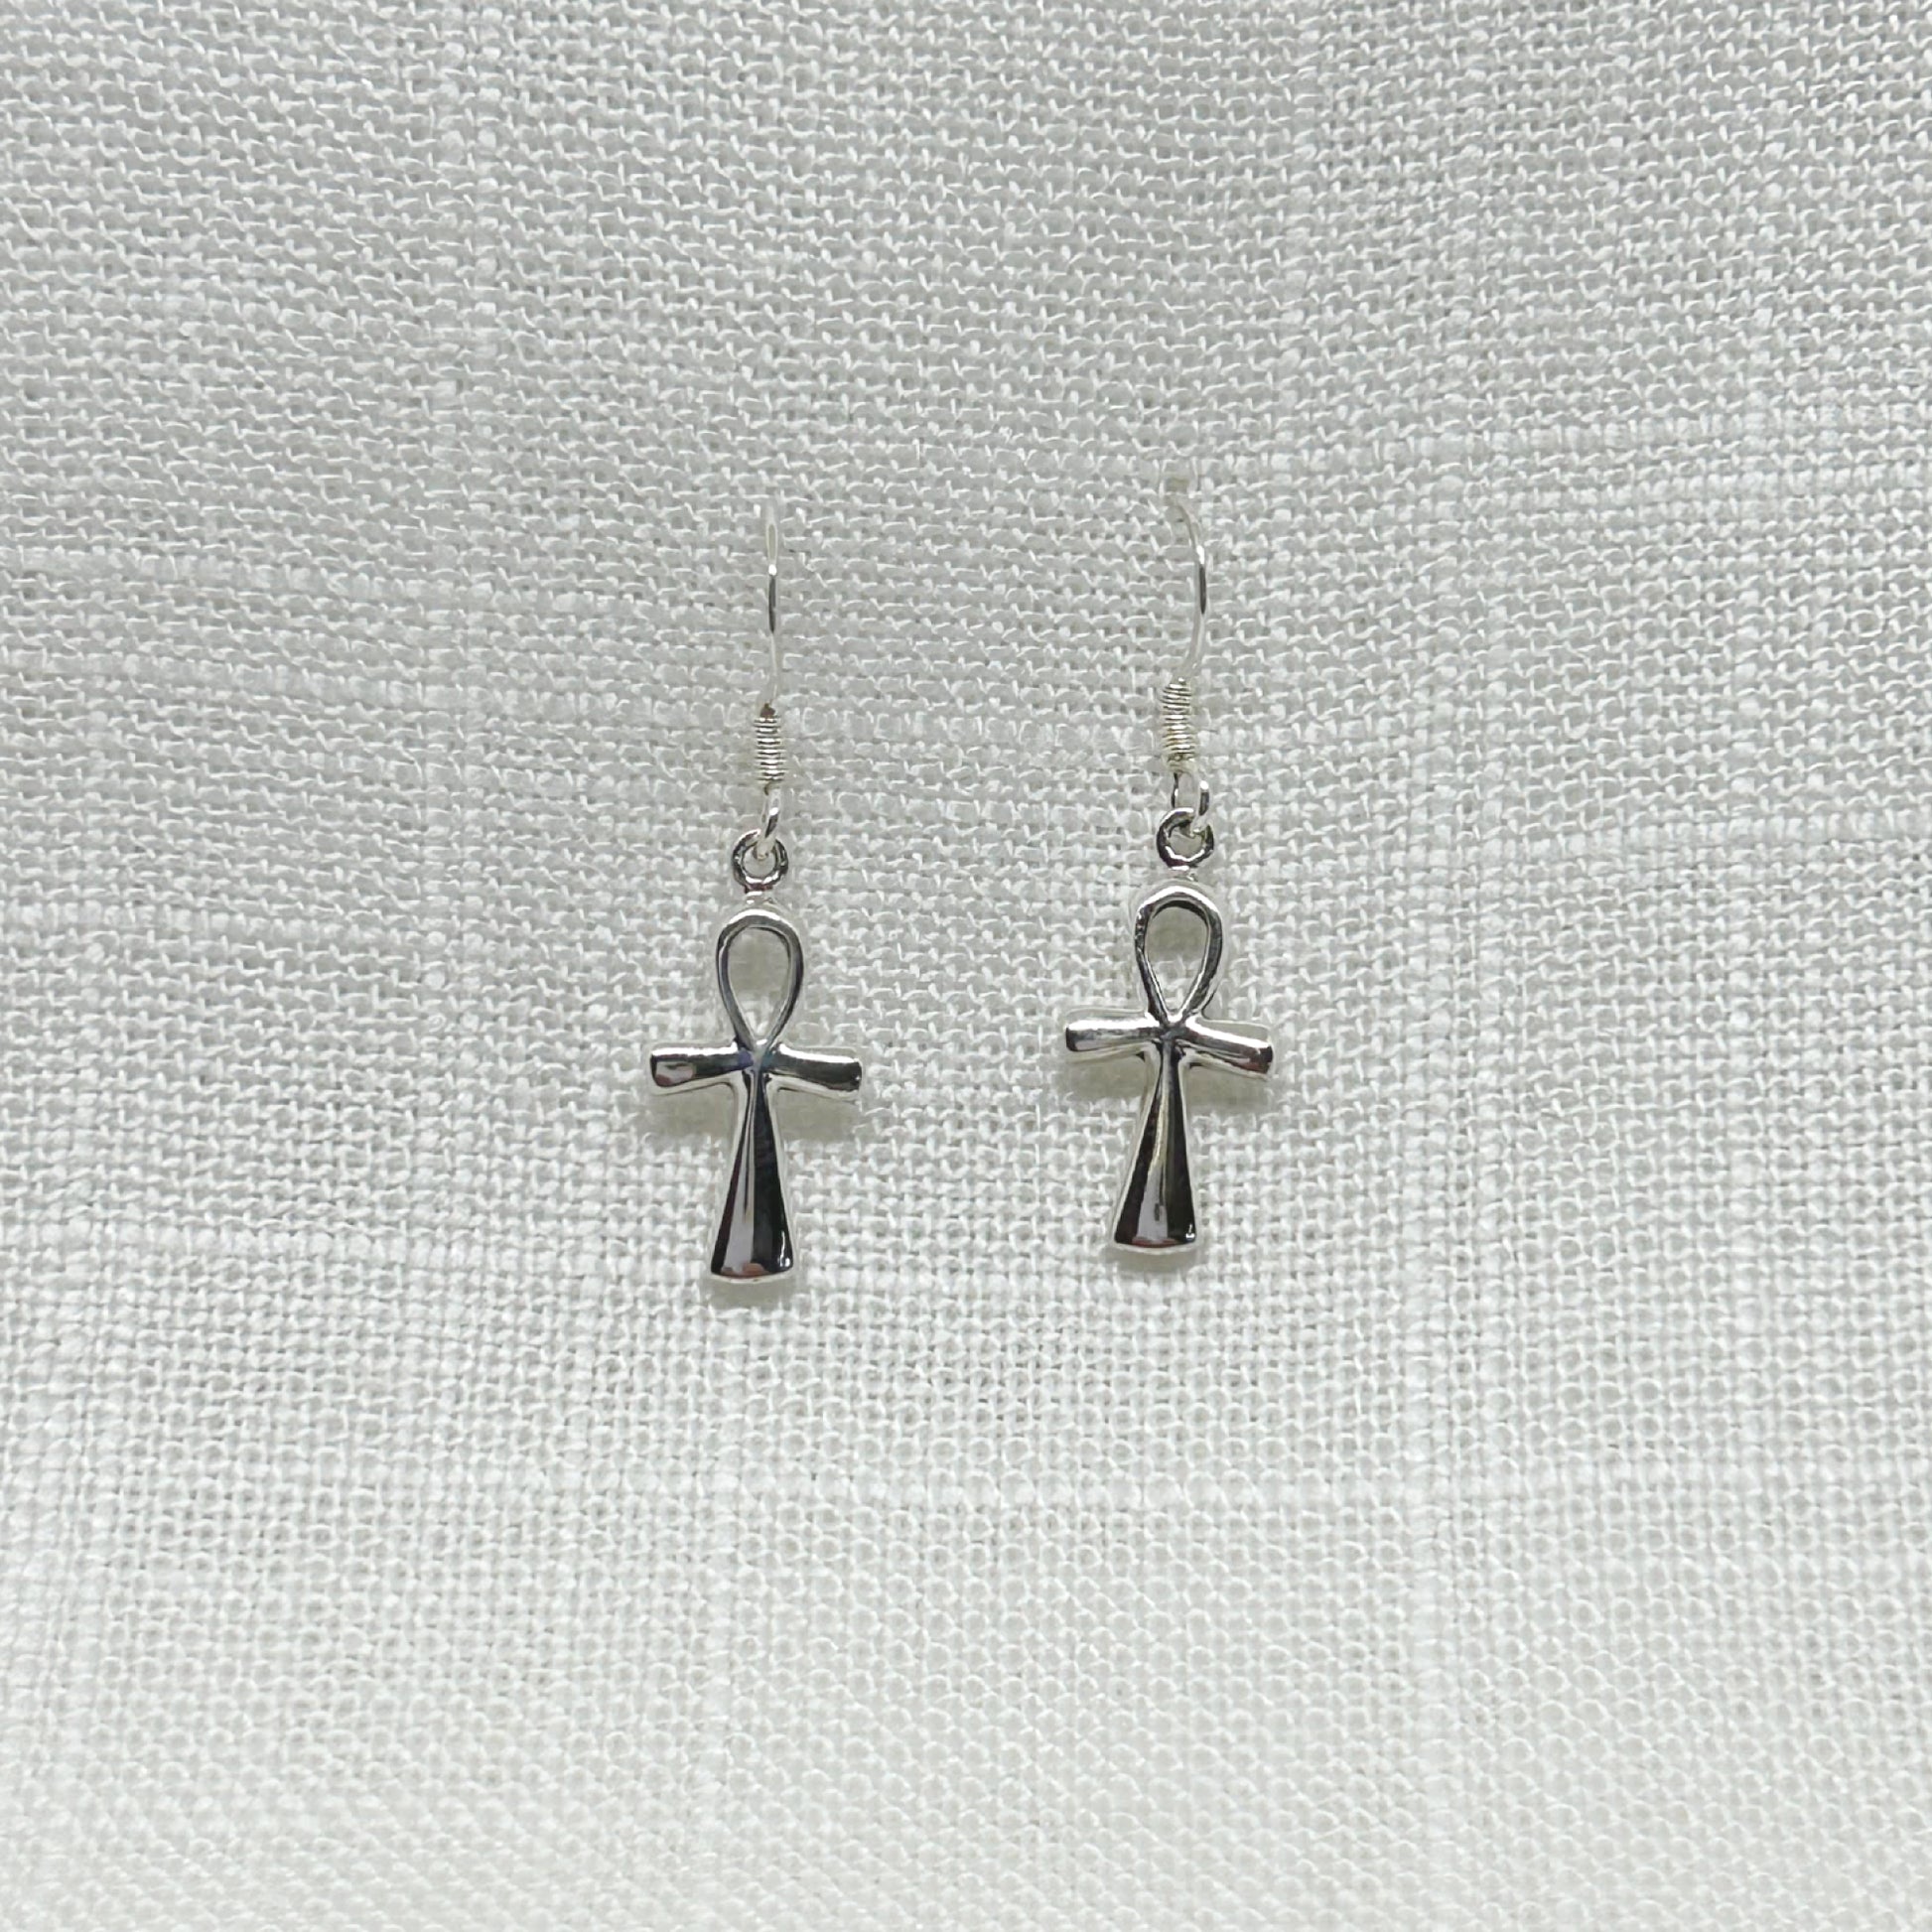 These 925 stamped ankh earrings are highly polished and are approximately 0.75cm wide by 3cms long including hooks and come gift boxed.  Matching Egyptian Ankh Necklaces are also available on the website in two different sizes